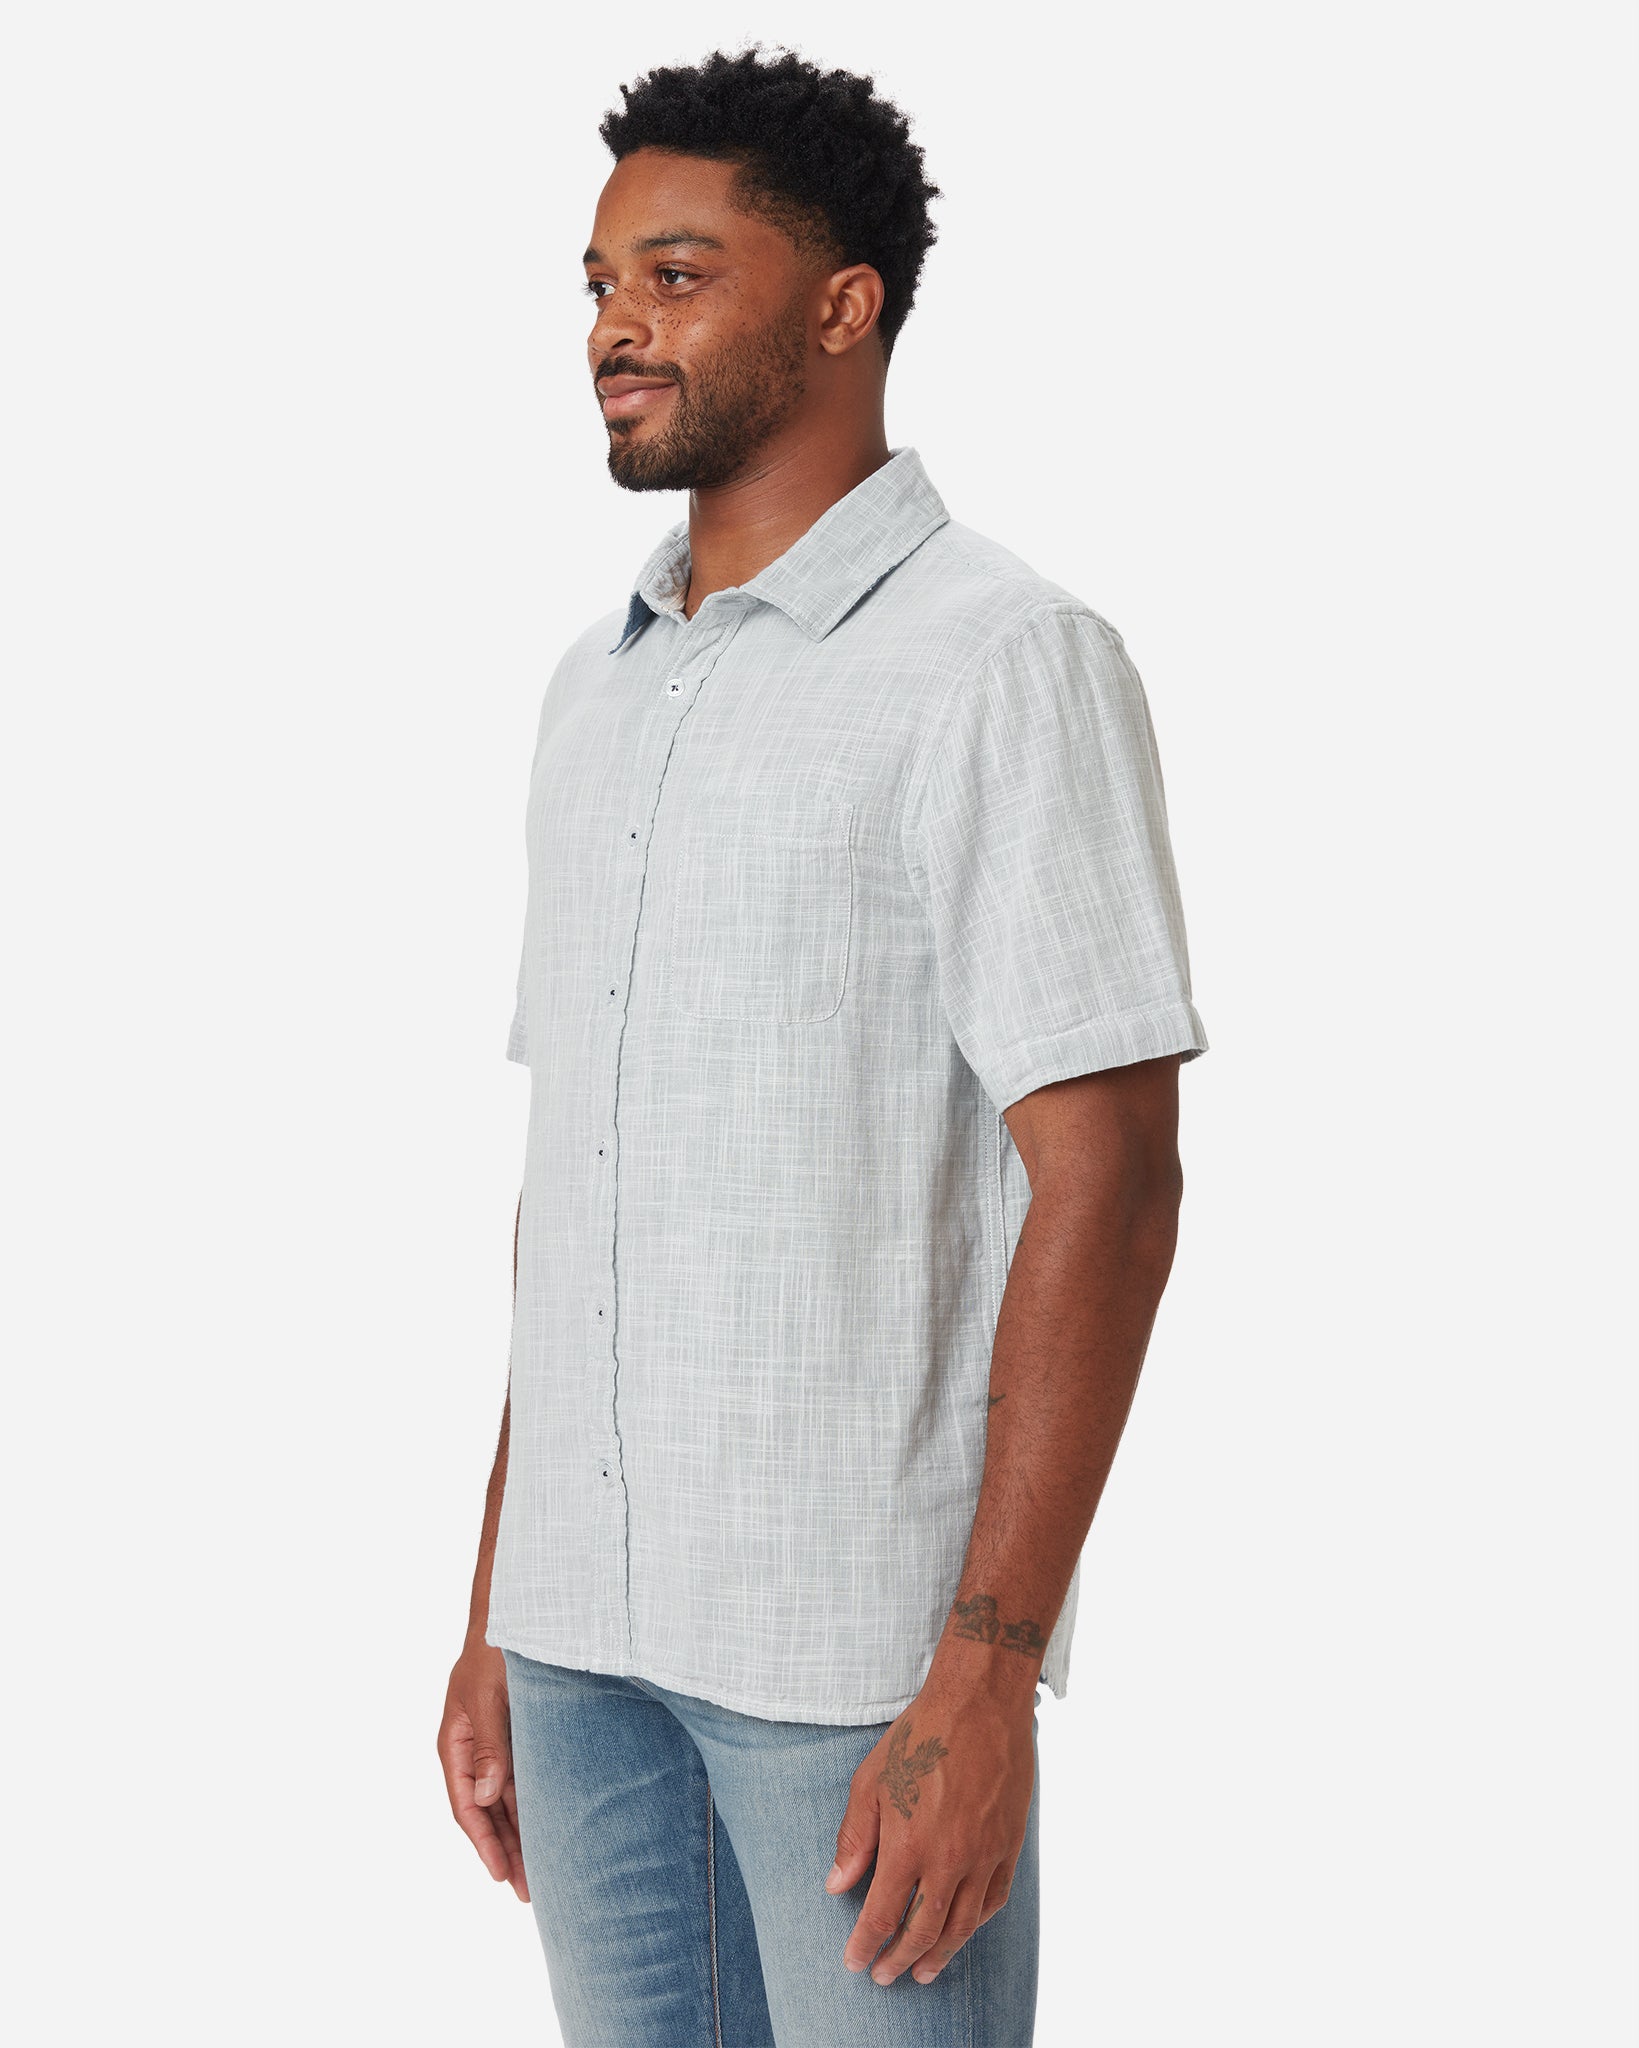 Model with a forward and rightward gaze wearing Ace Rivington collared grey short-sleeved double gauze soft-textured cotton shirt with indigo blue interior, pearl buttons, and left-breast pocket and a pair of Ace Rivington medium vintage medium light blue denim jeans 